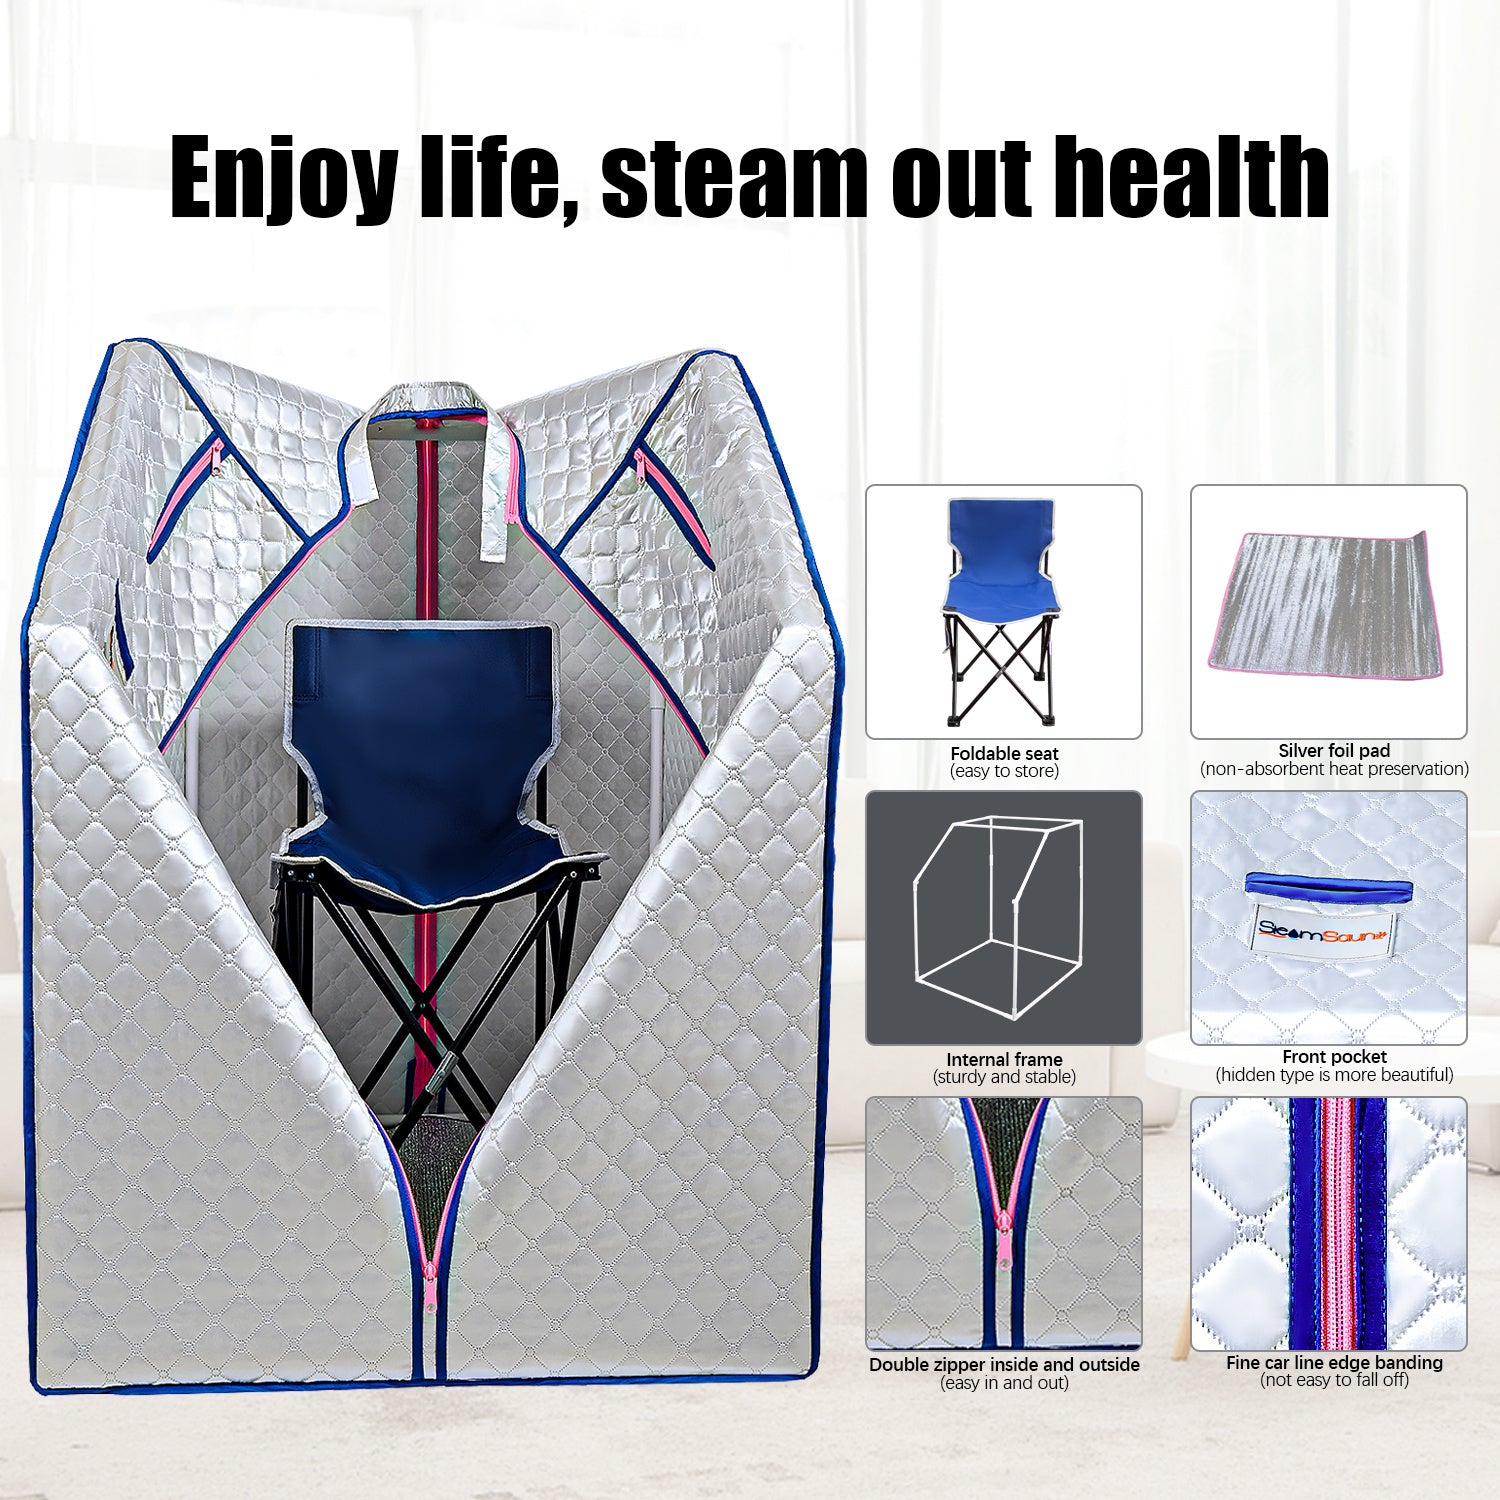 Portable Home Sauna - Your Personal Spa Anywhere: Tent, Heater, Chair, Remote Included